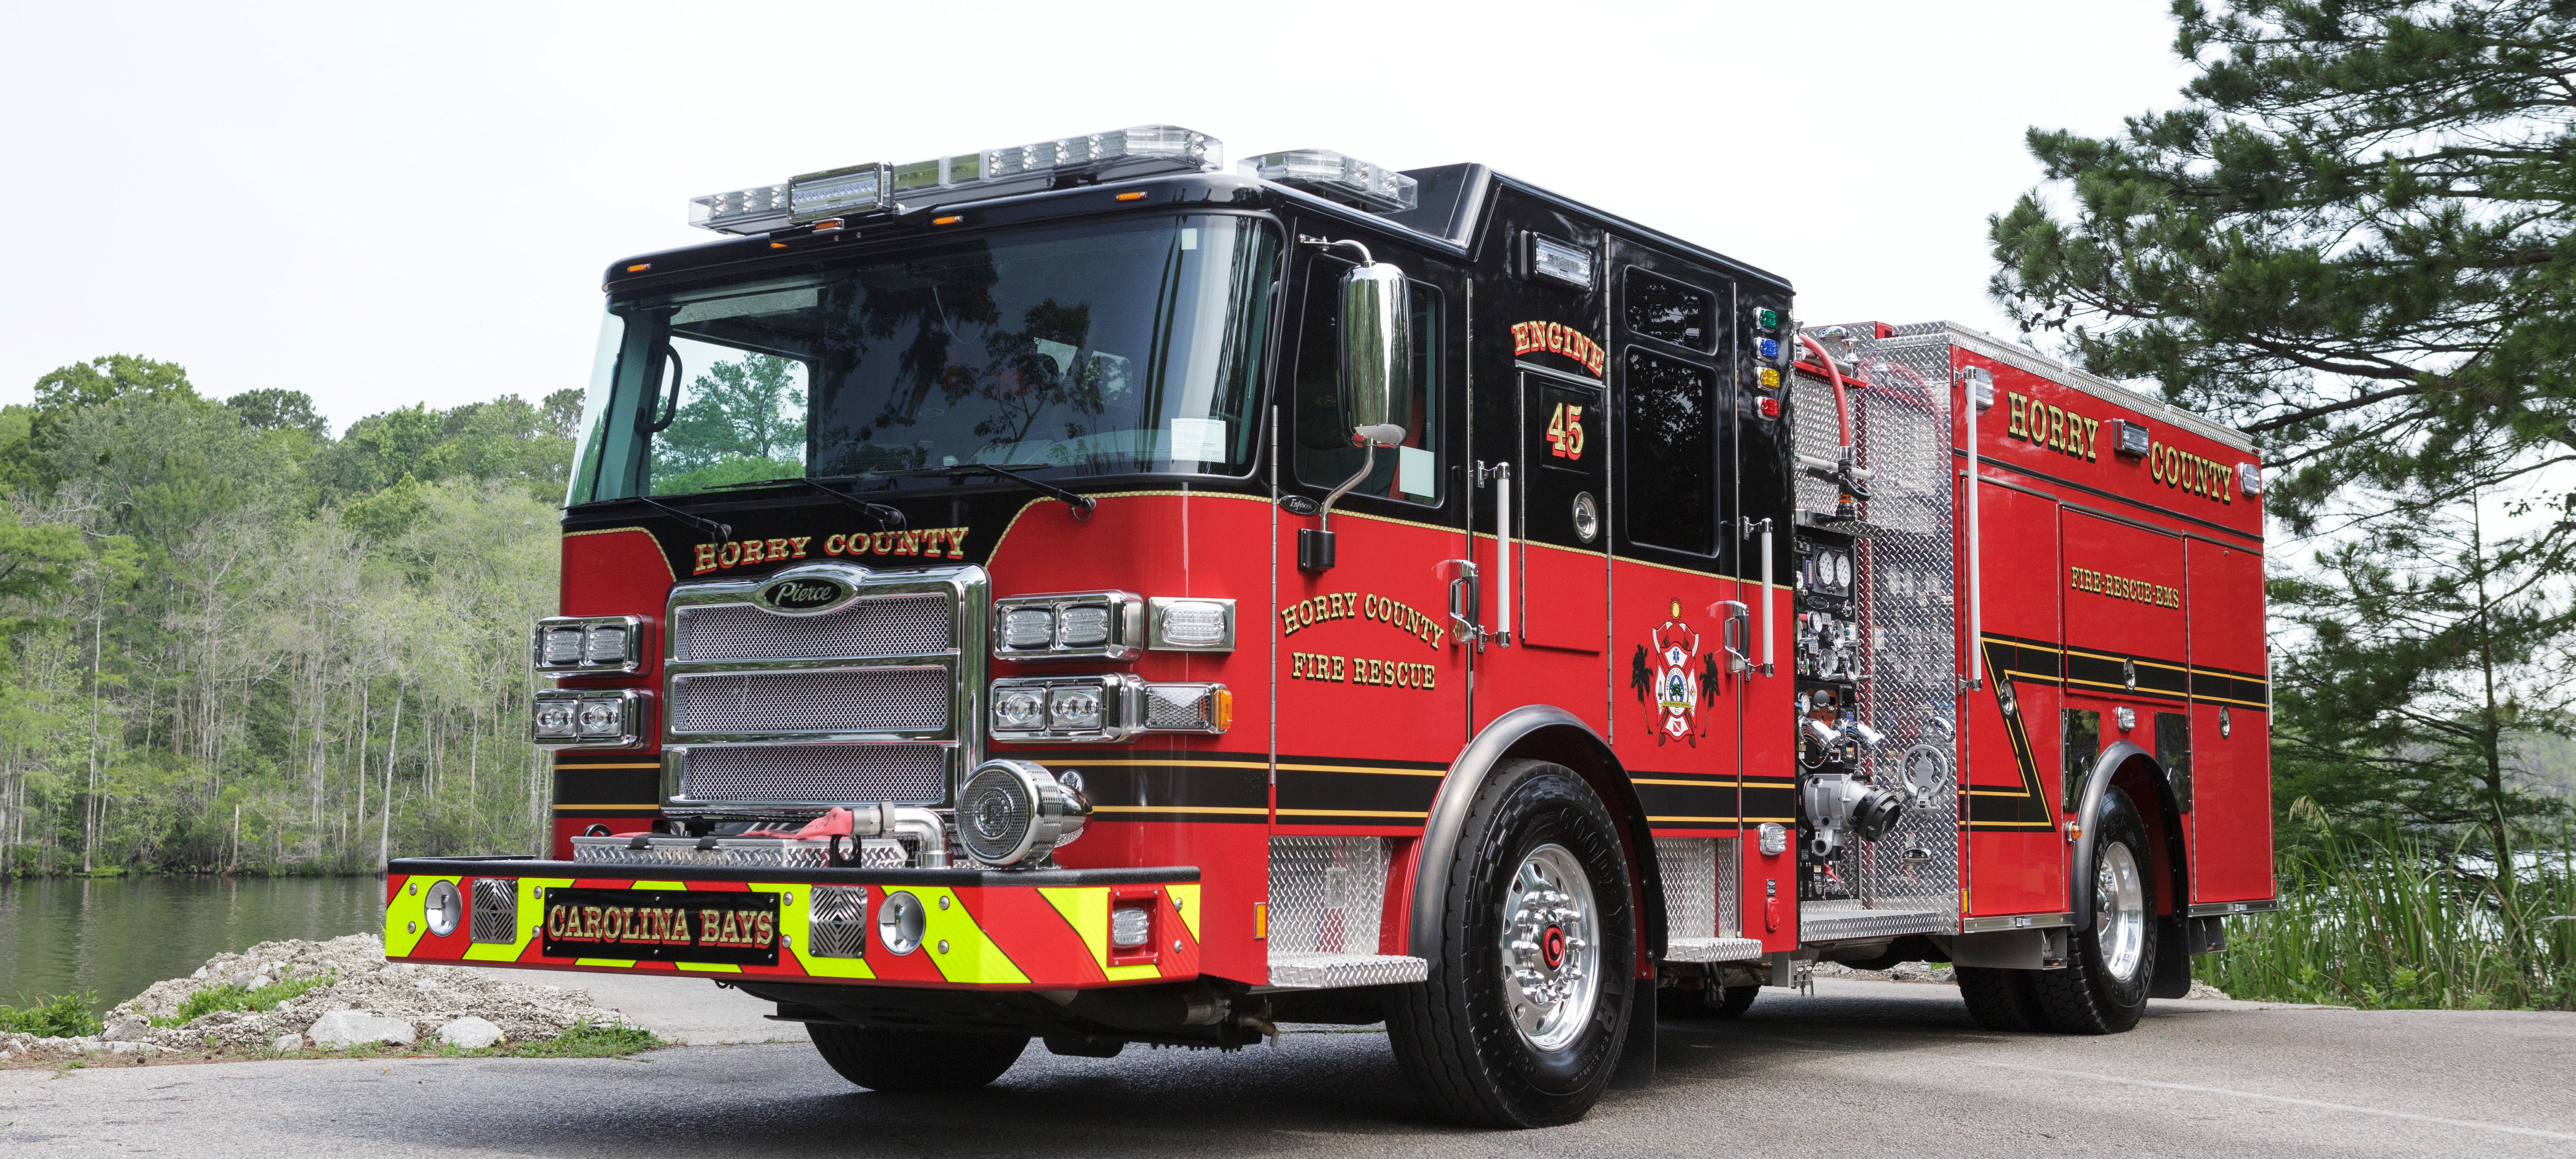 Detail Images Of Fire Truck Nomer 40